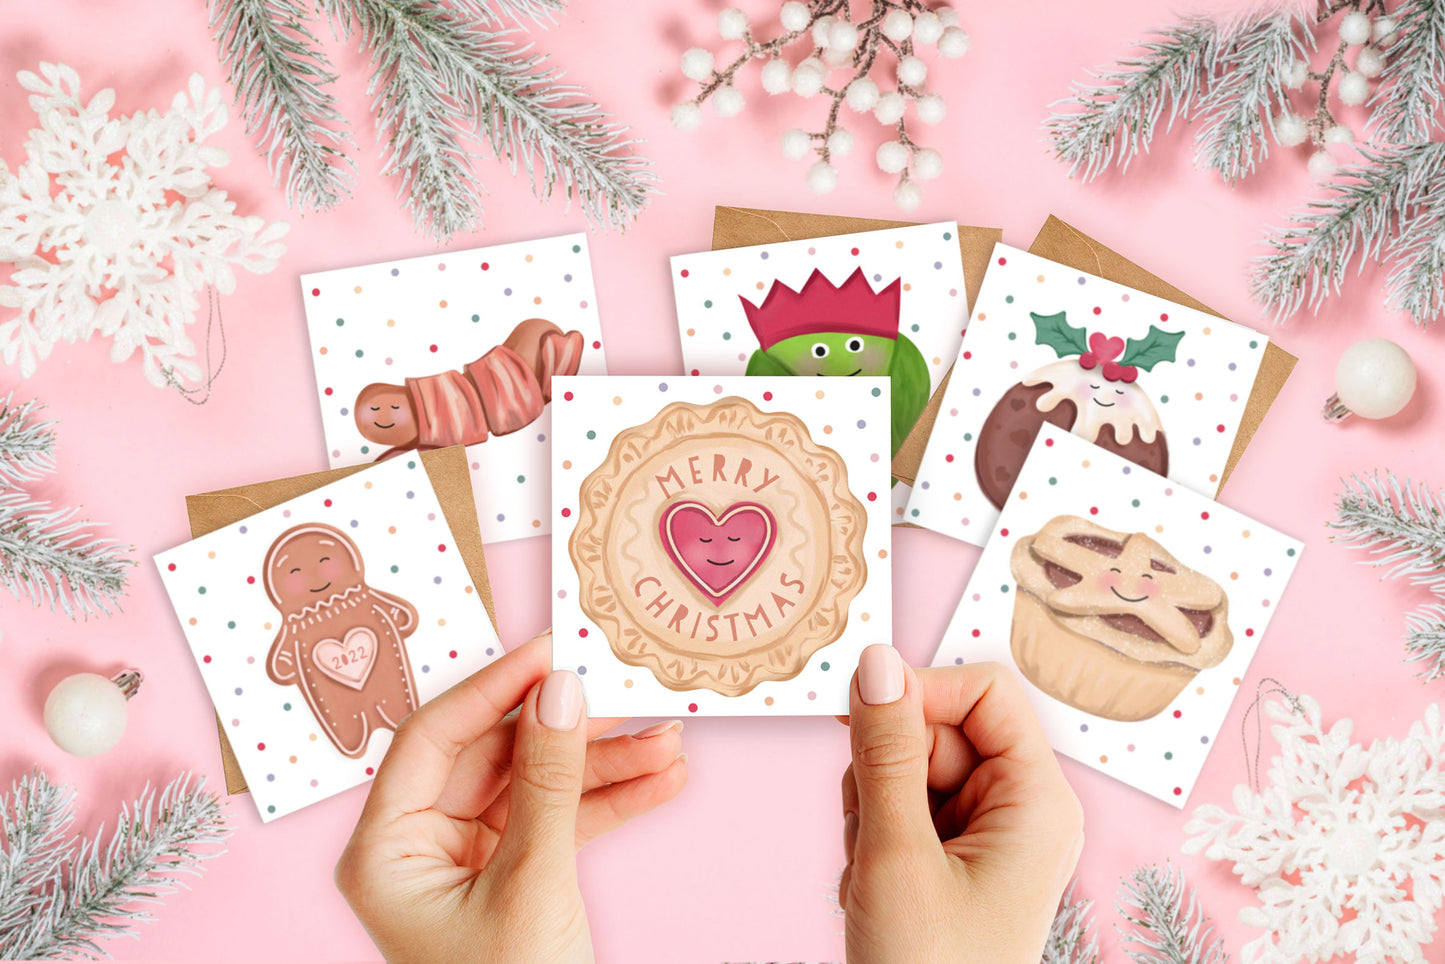 Favourite Christmas Things Mini Christmas Card Pack. Pack of Christmas Cards. Cute Christmas. Mixed Pack of Cards and Envelopes.